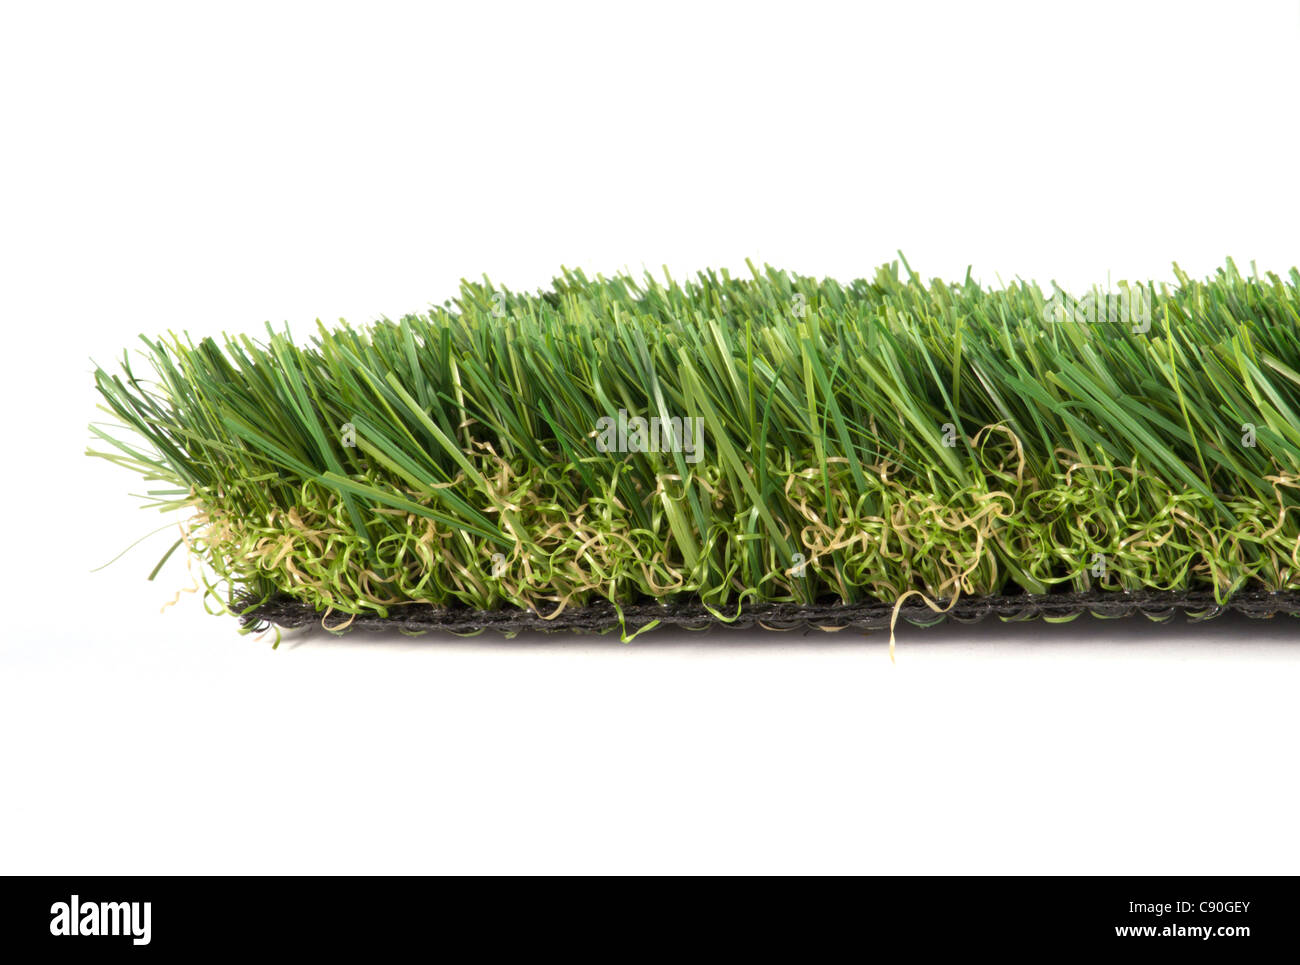 patch of green artificial grass on a white background Stock Photo